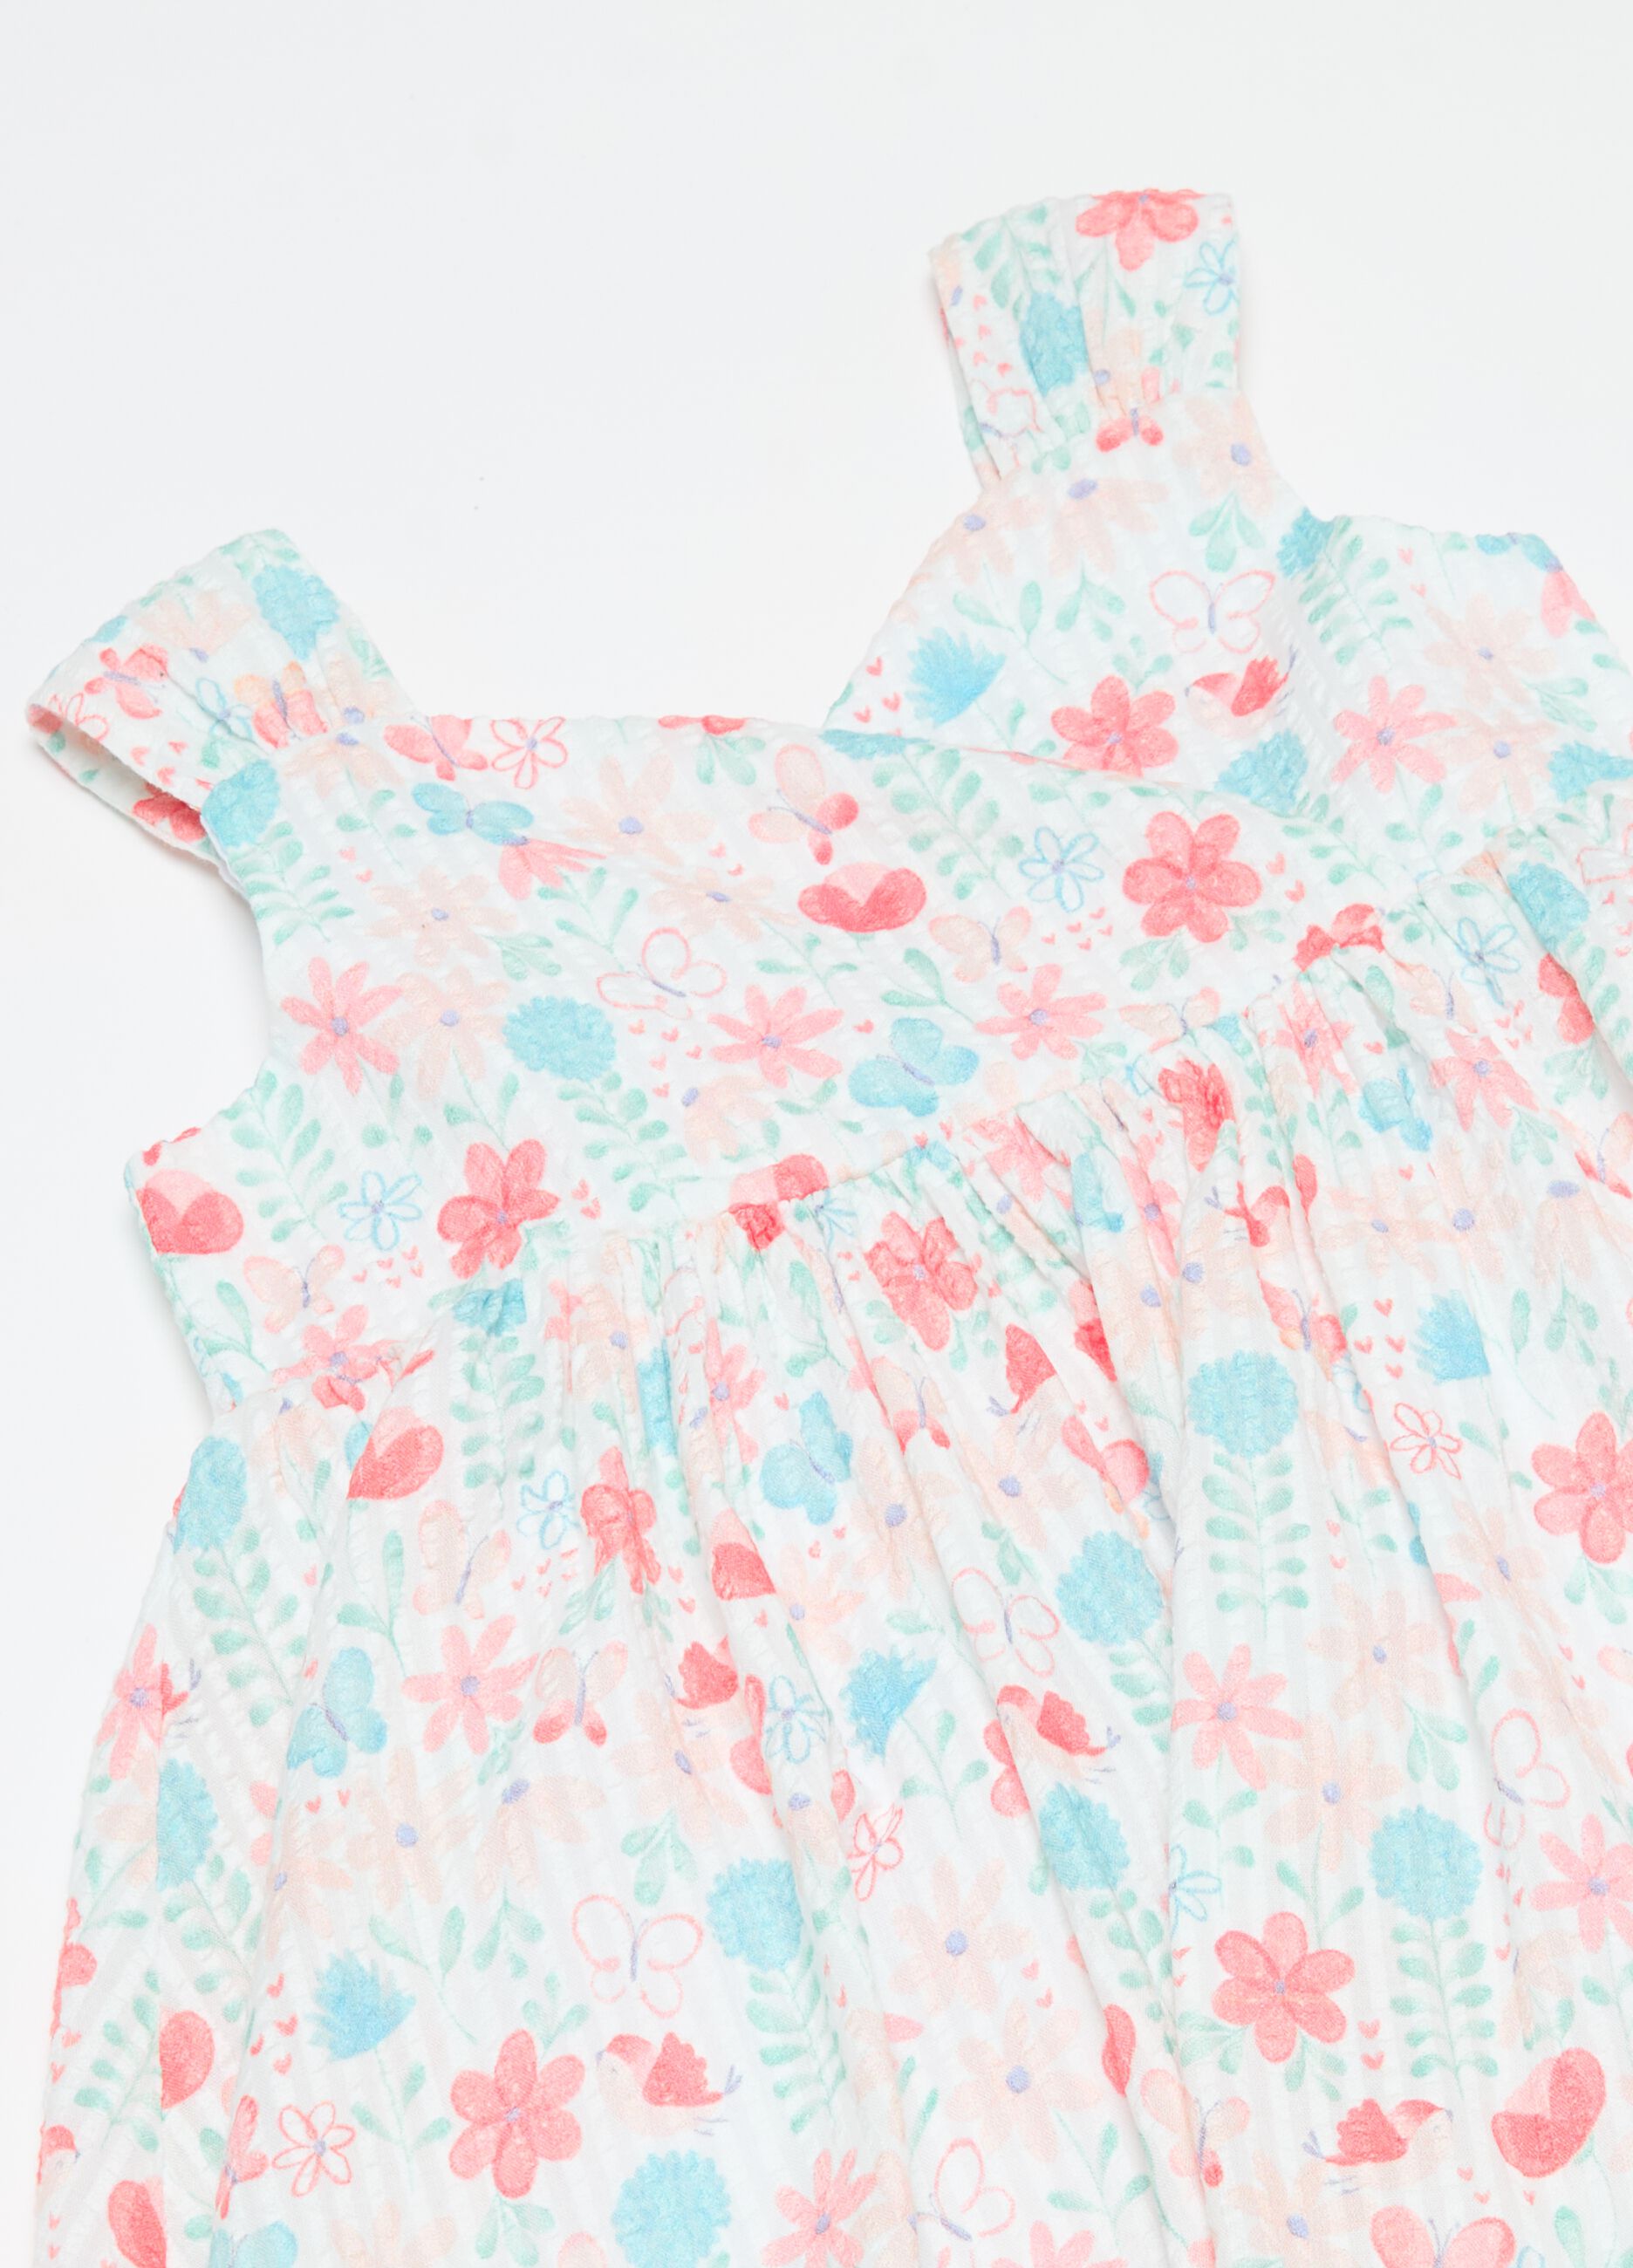 Cotton dress with floral pattern